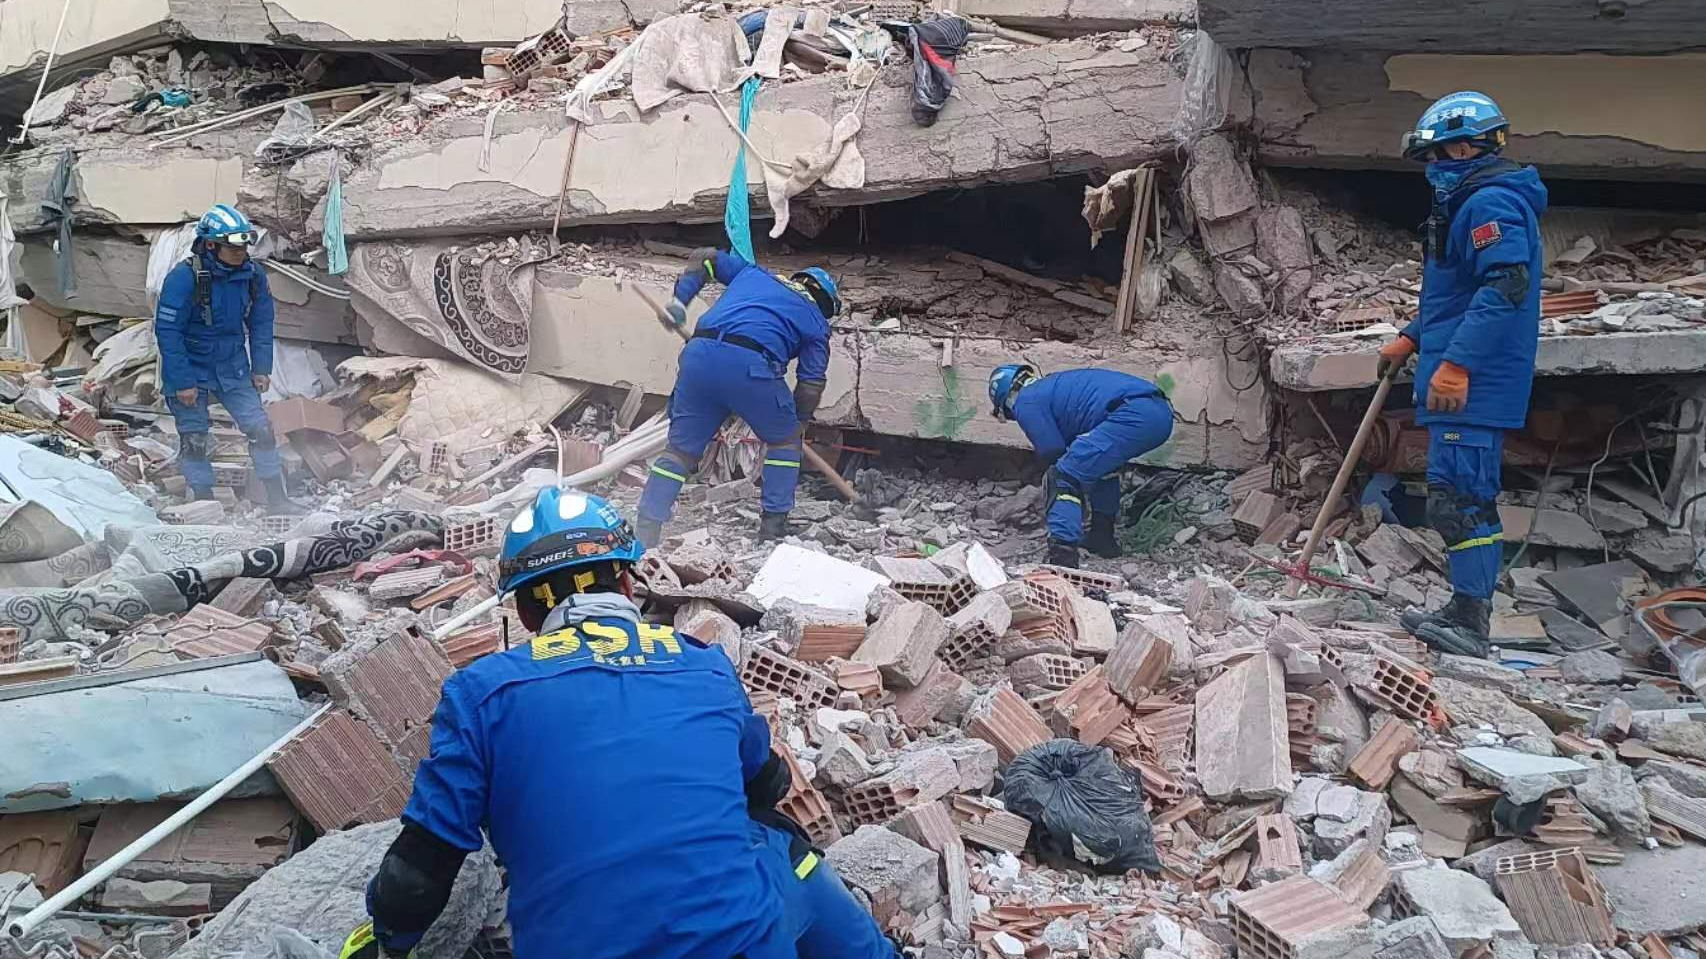 Rescuers from China's nonprofit civil rescue organization Blue Sky Rescue carry out demolition in the earthquake-stricken area of ​​Turkey. /CMG